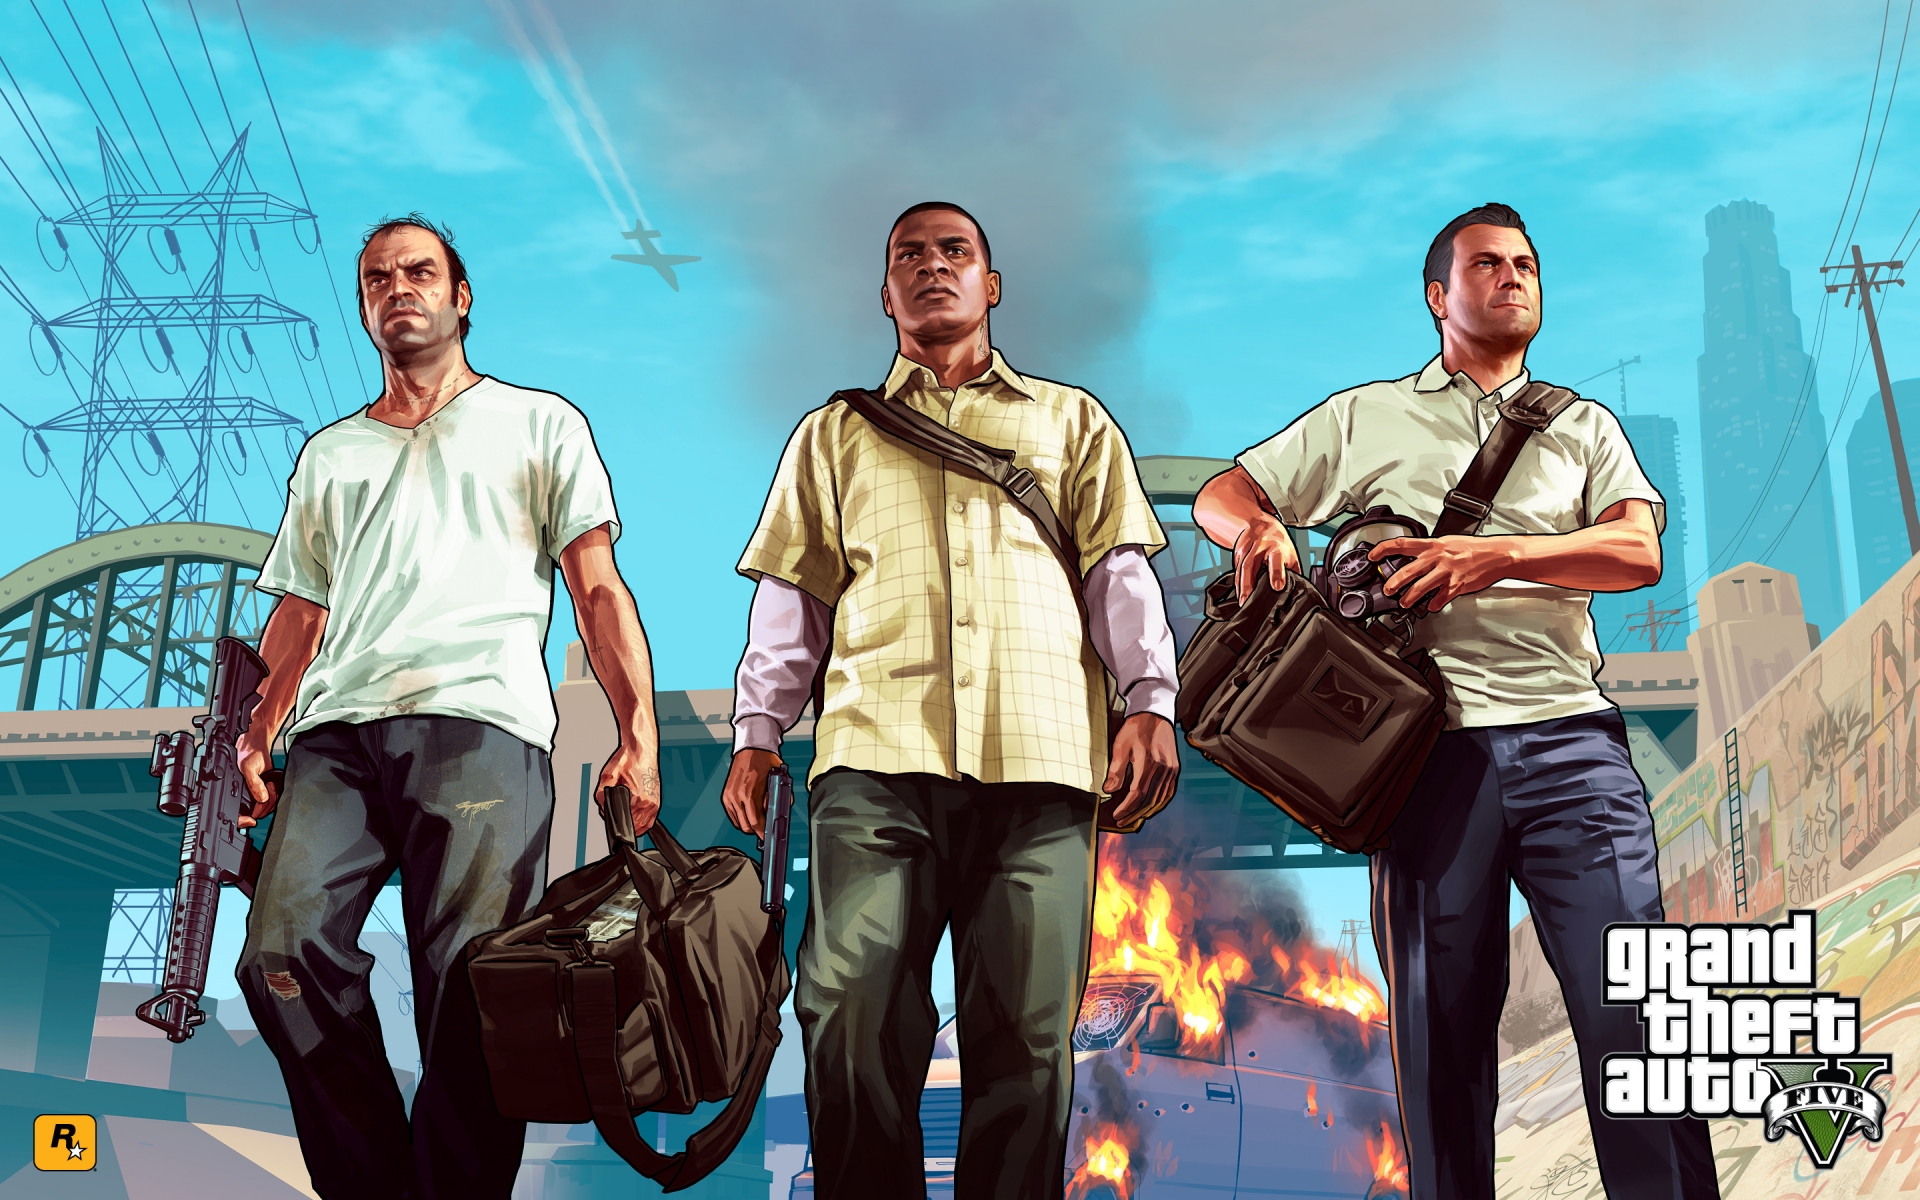 Grand Theft Auto Vice City for 1920 x 1200 widescreen resolution